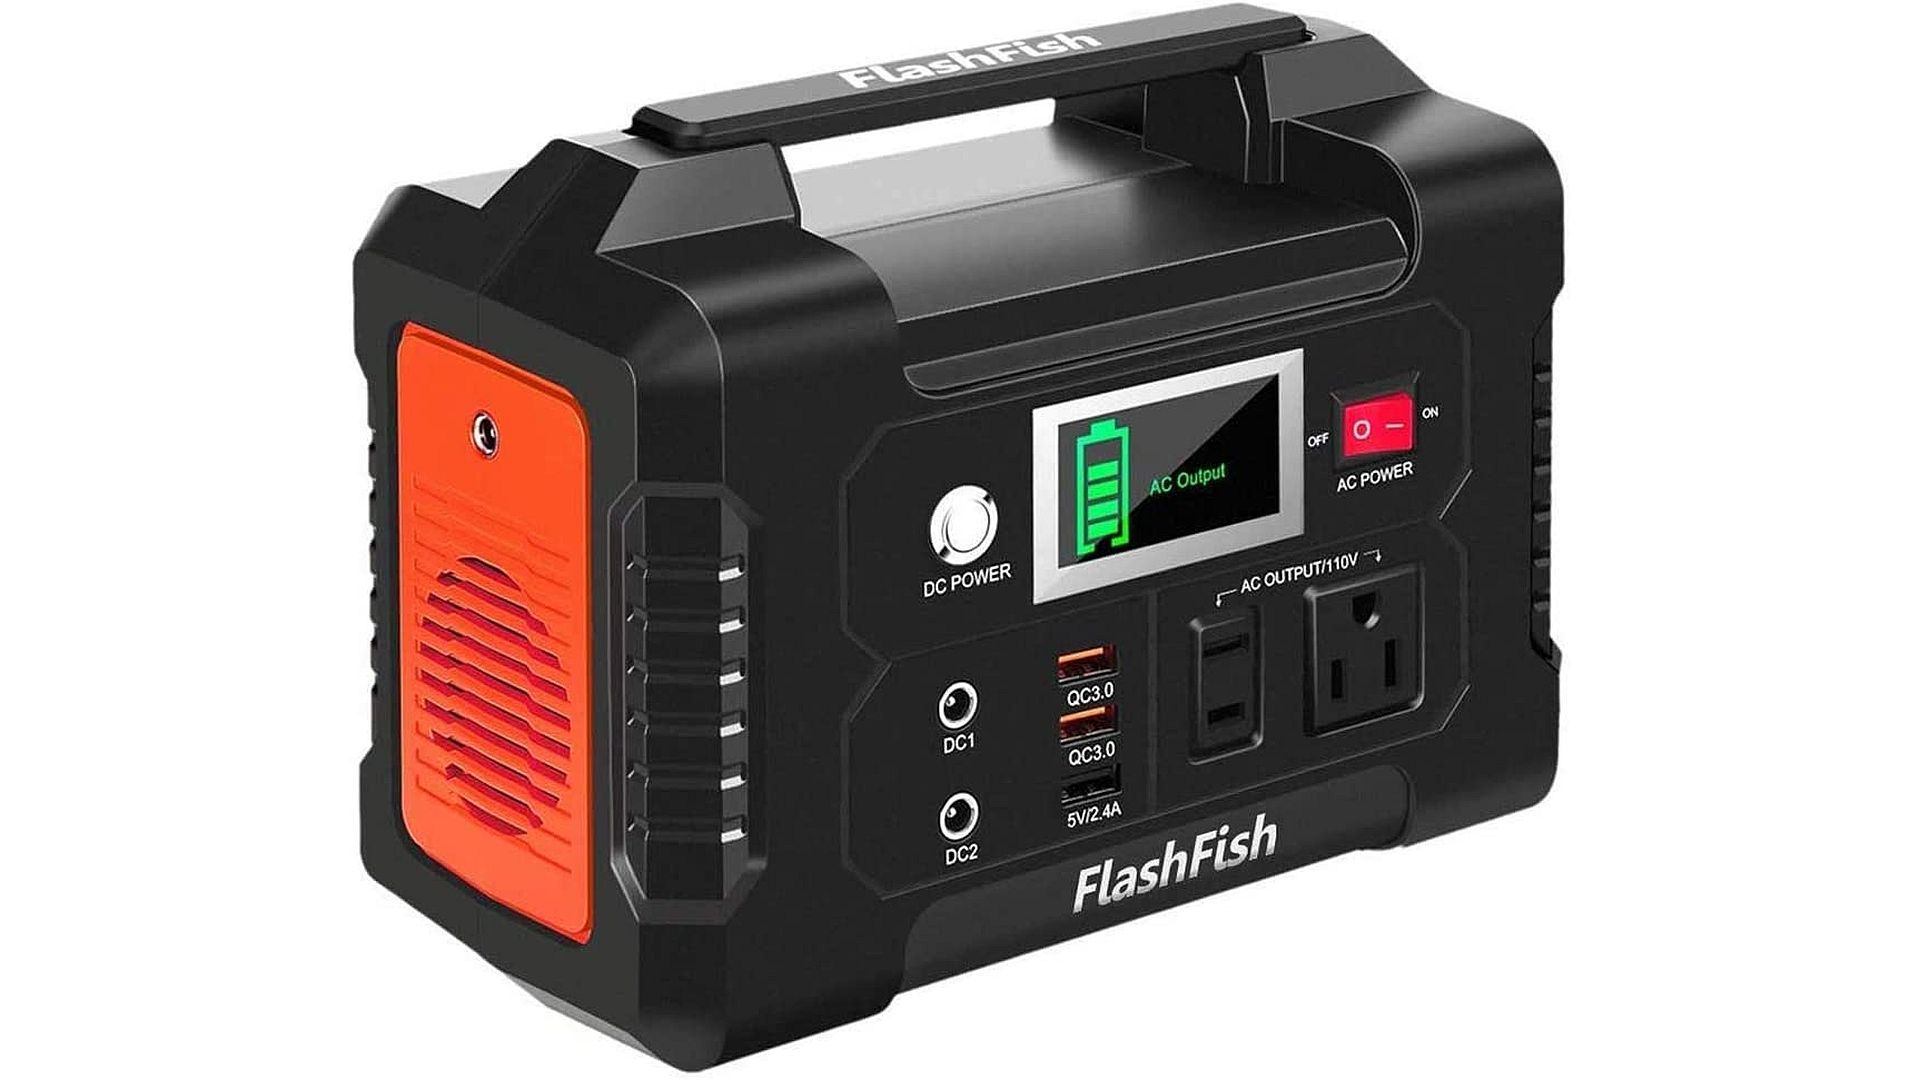 The FlashFish EA200 Is a Lightweight 200W Portable Power Station